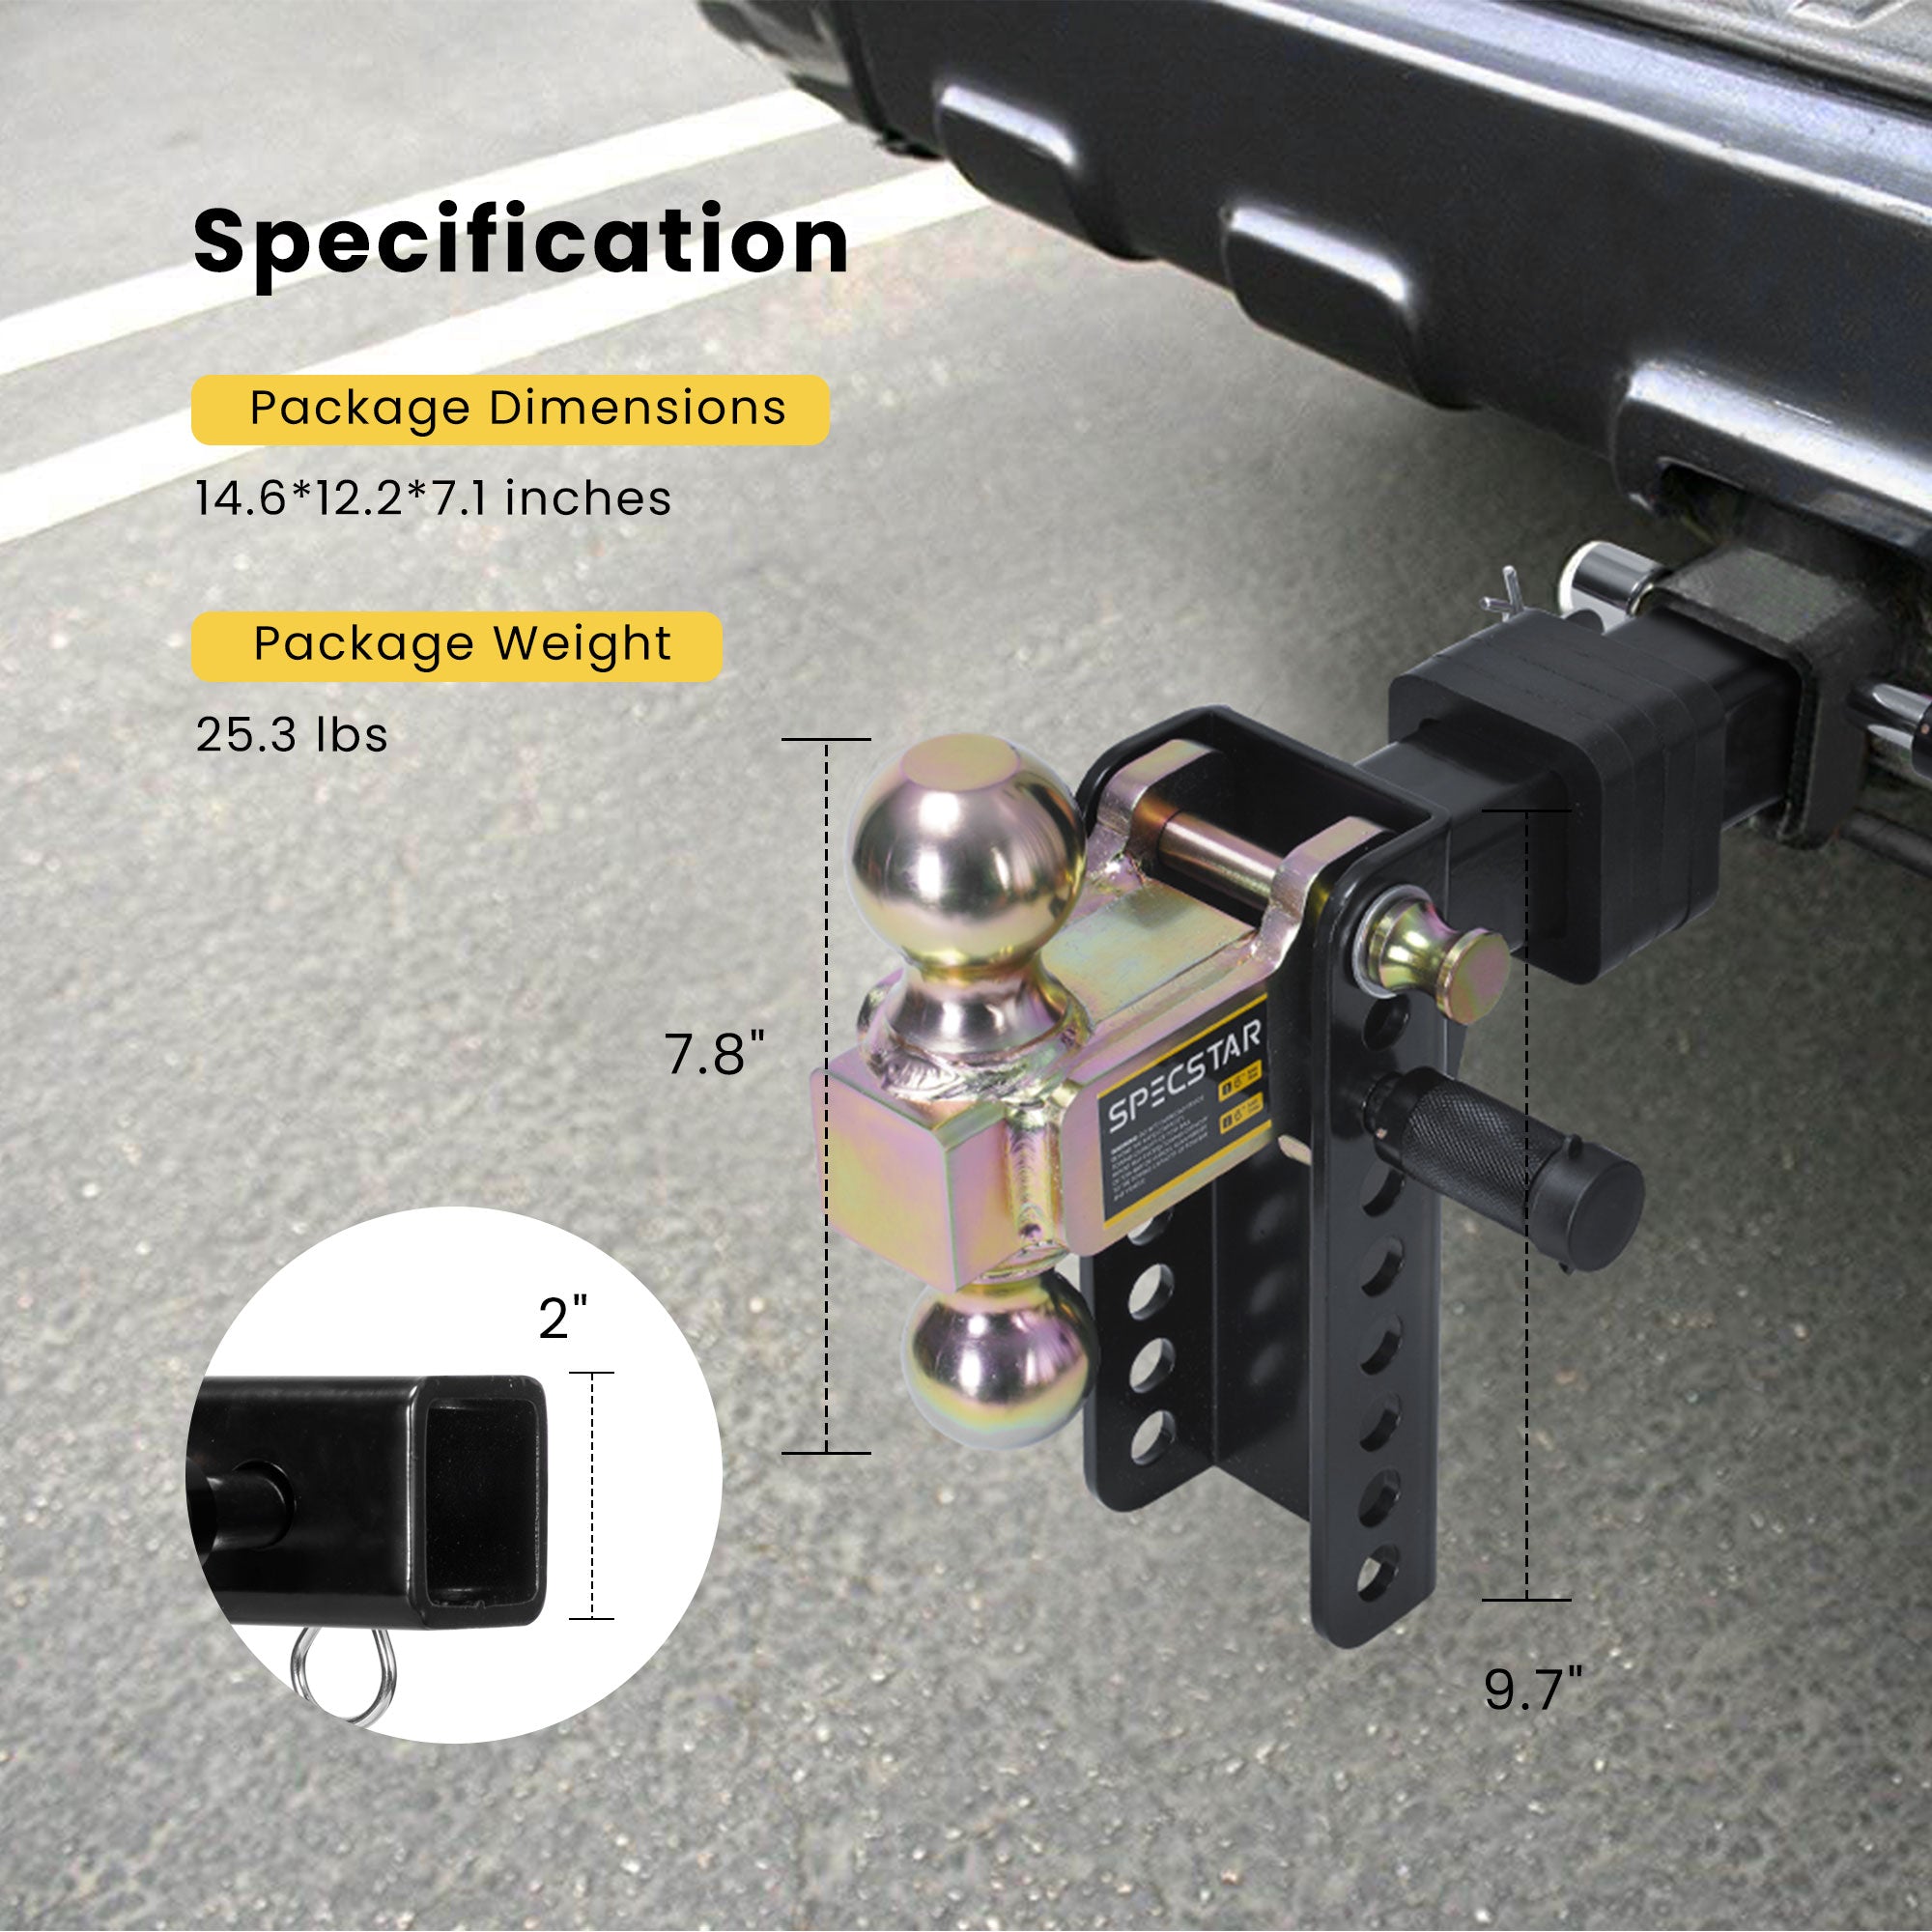 SPECSTAR Adjustable Trailer Hitch Ball Mount 6Inch with Double Stainless Steel Locks